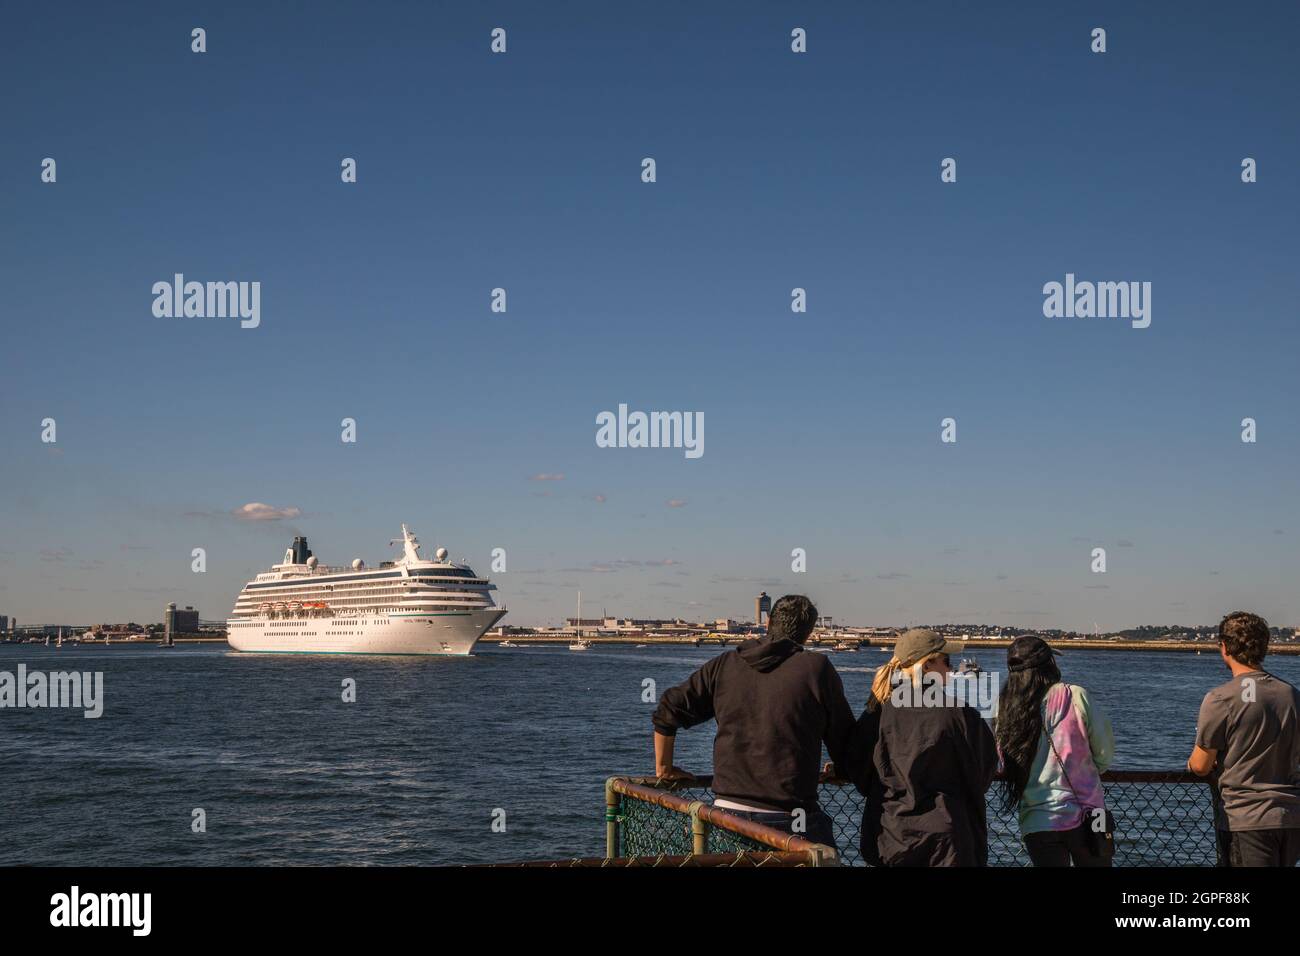 Boston, MA, US - September 19, 2021: People watch as nearly empty cruise ship leaves harbor. The cruise industry has struggled economically during the Stock Photo